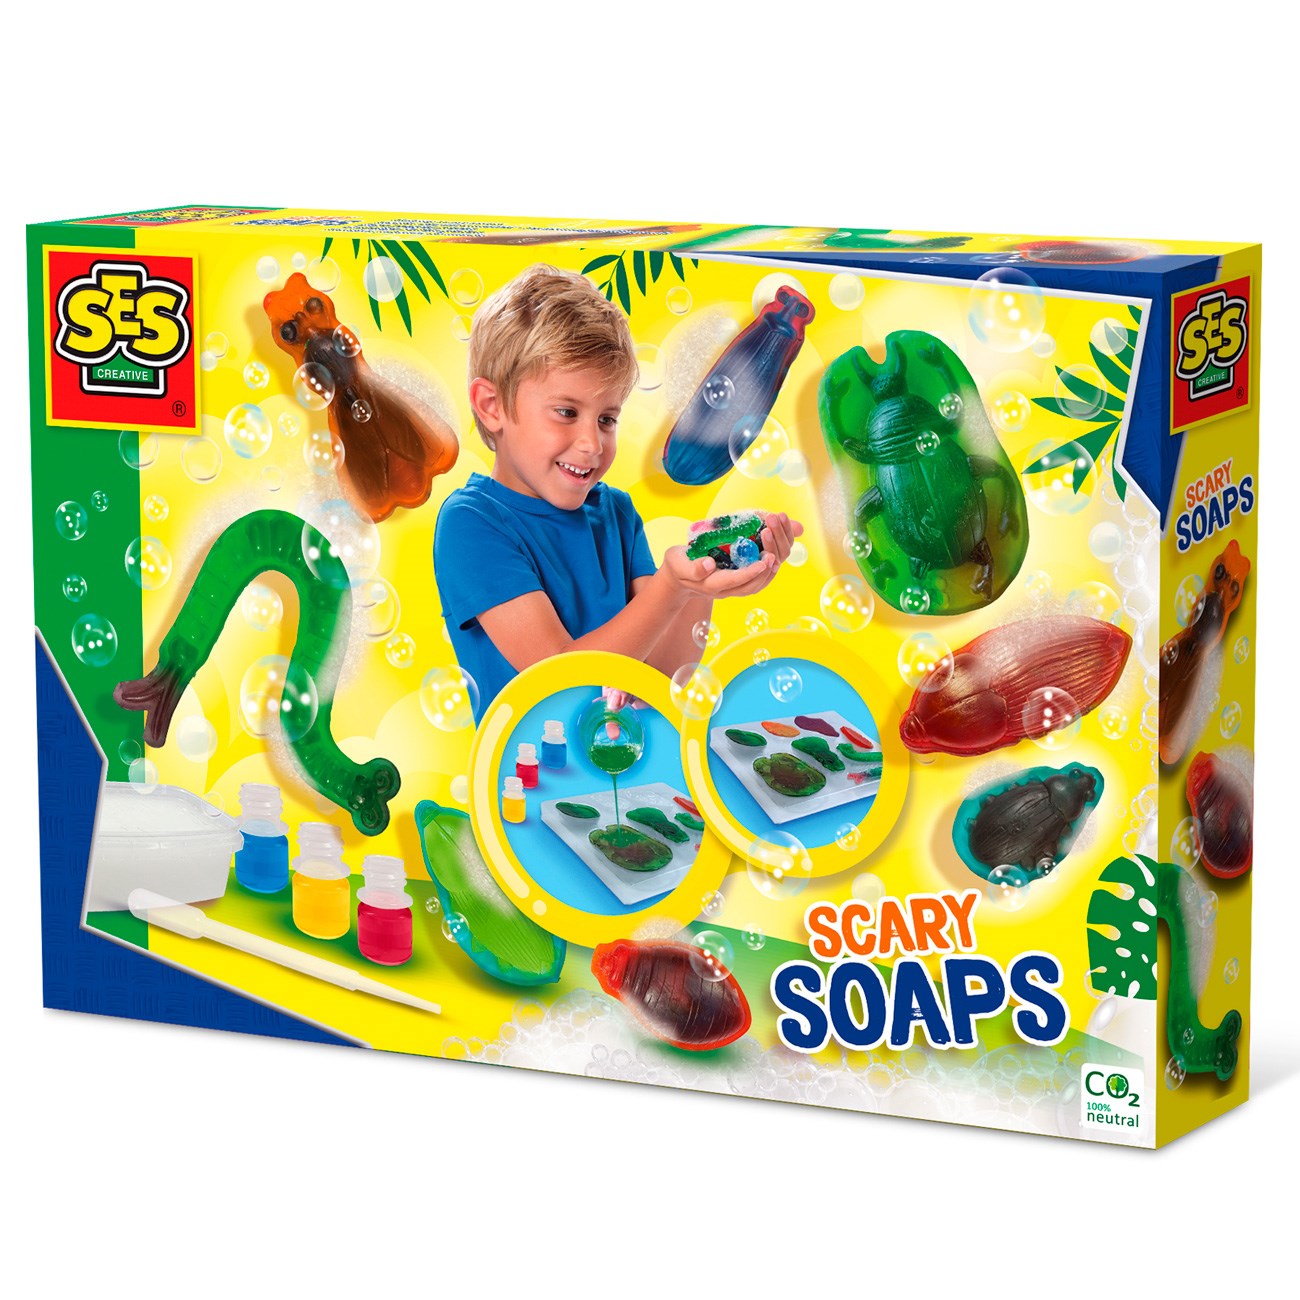 SES Creative Make Scary Soaps